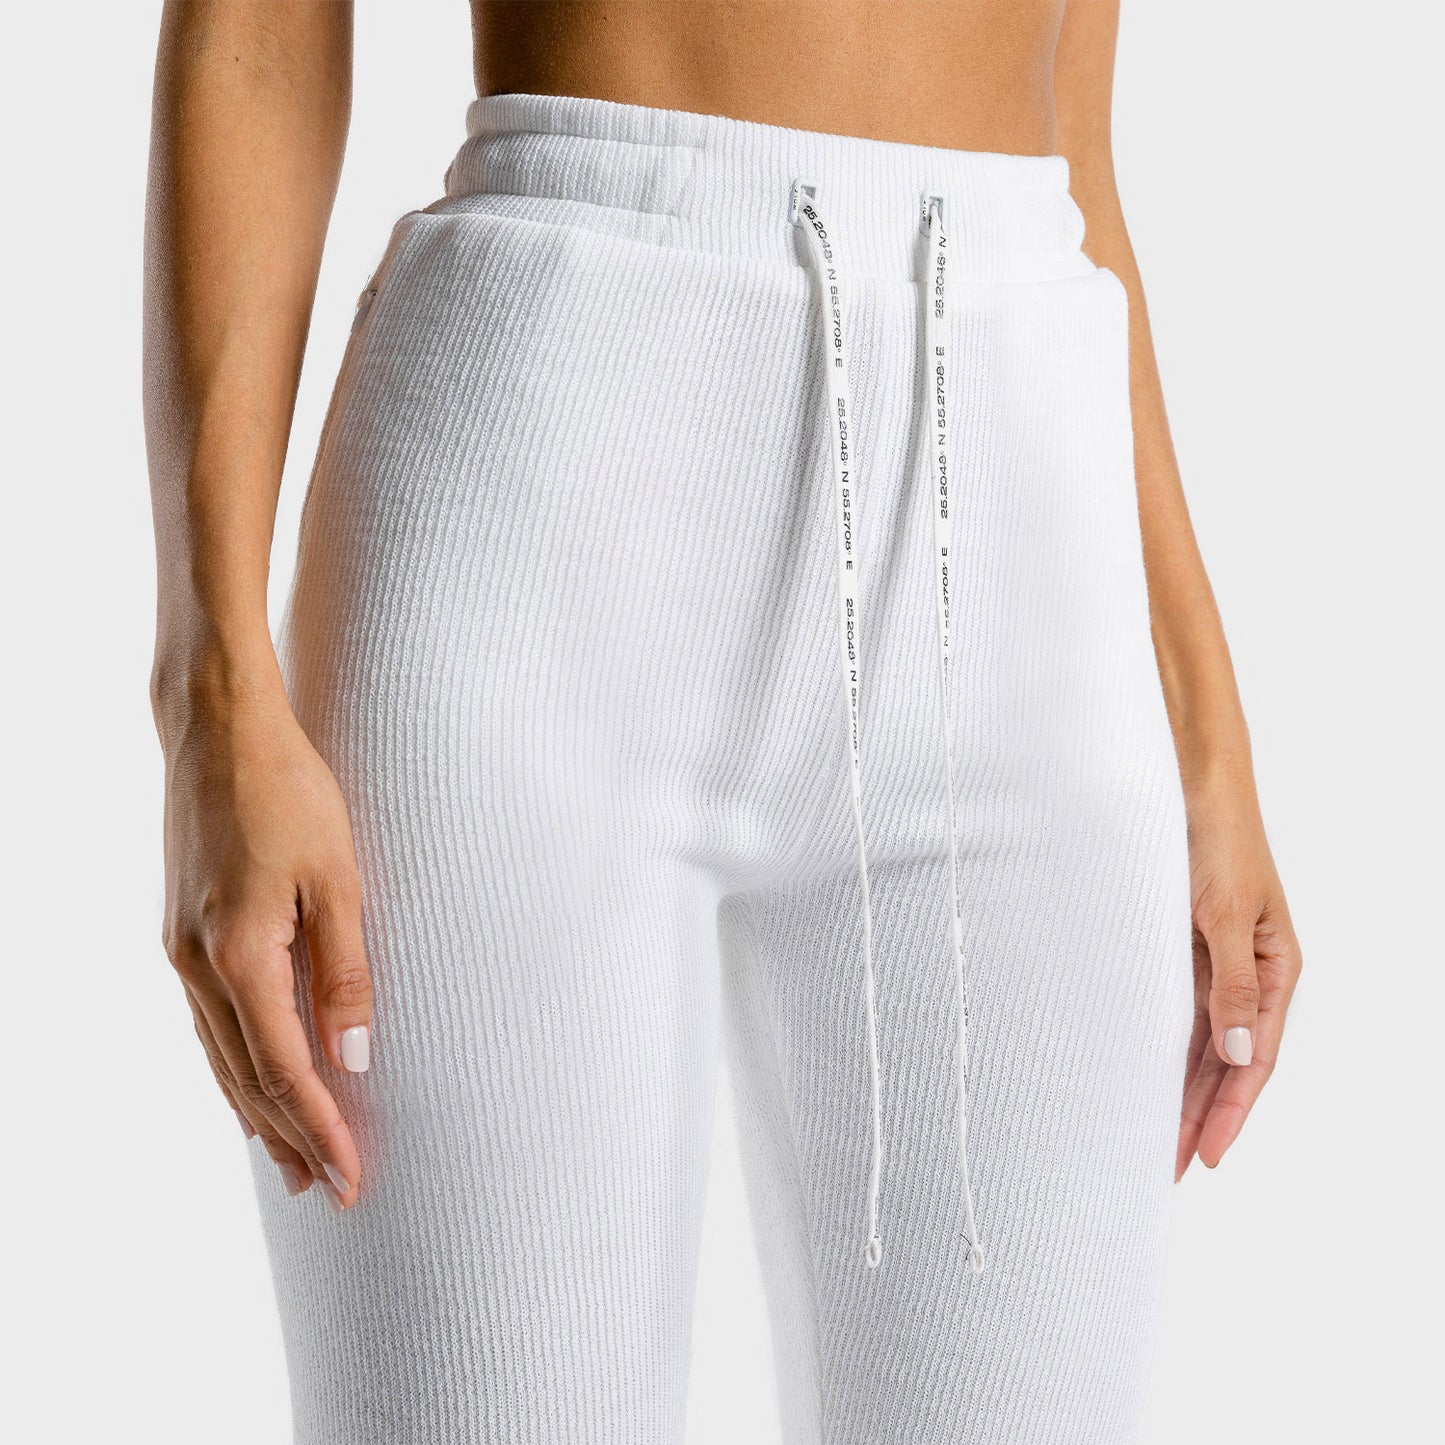 squatwolf-gym-pants-for-women-luxe-joggers-white-workout-clothes